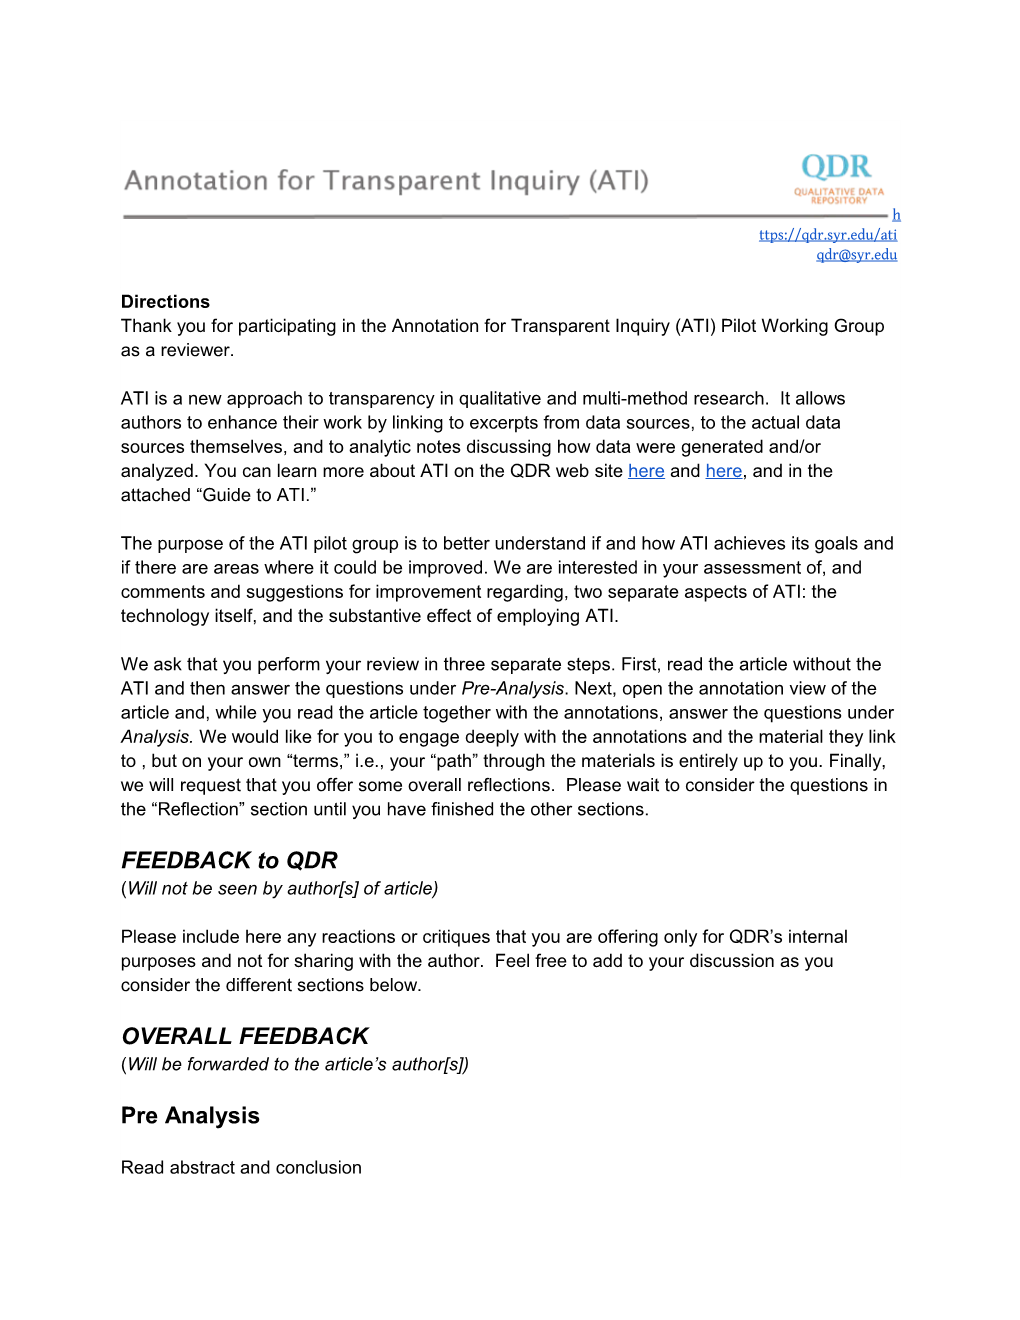 Thank You for Participating in the Annotation for Transparent Inquiry (ATI) Pilot Working